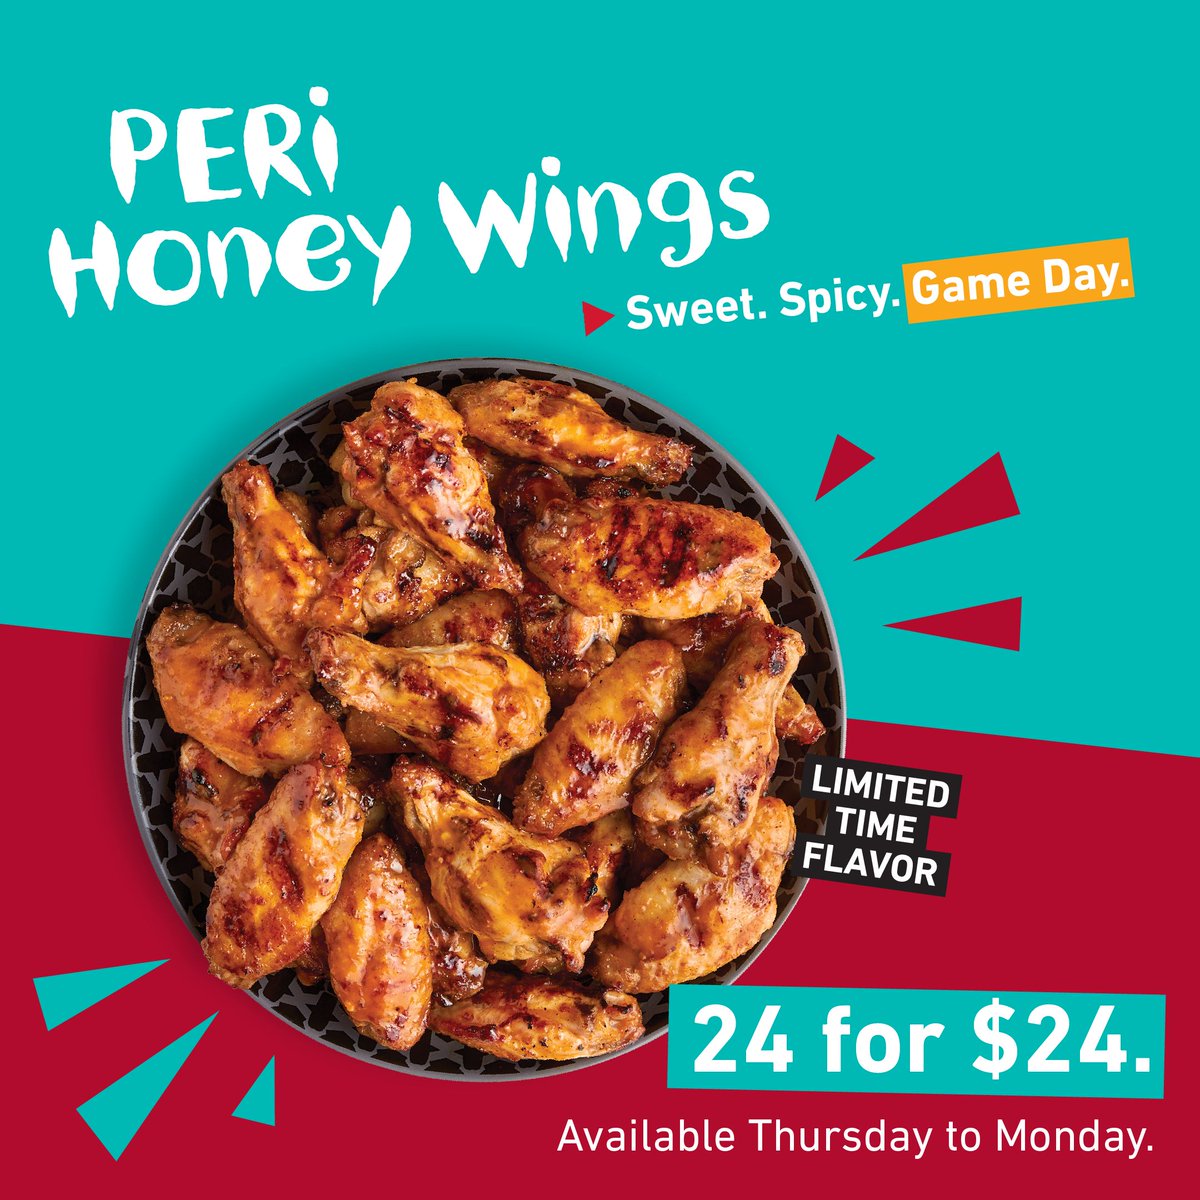 Don't fumble on flavor. Fire up your game day with our new 24 for $24 PERi Honey Wings. Available Thursday to Monday.